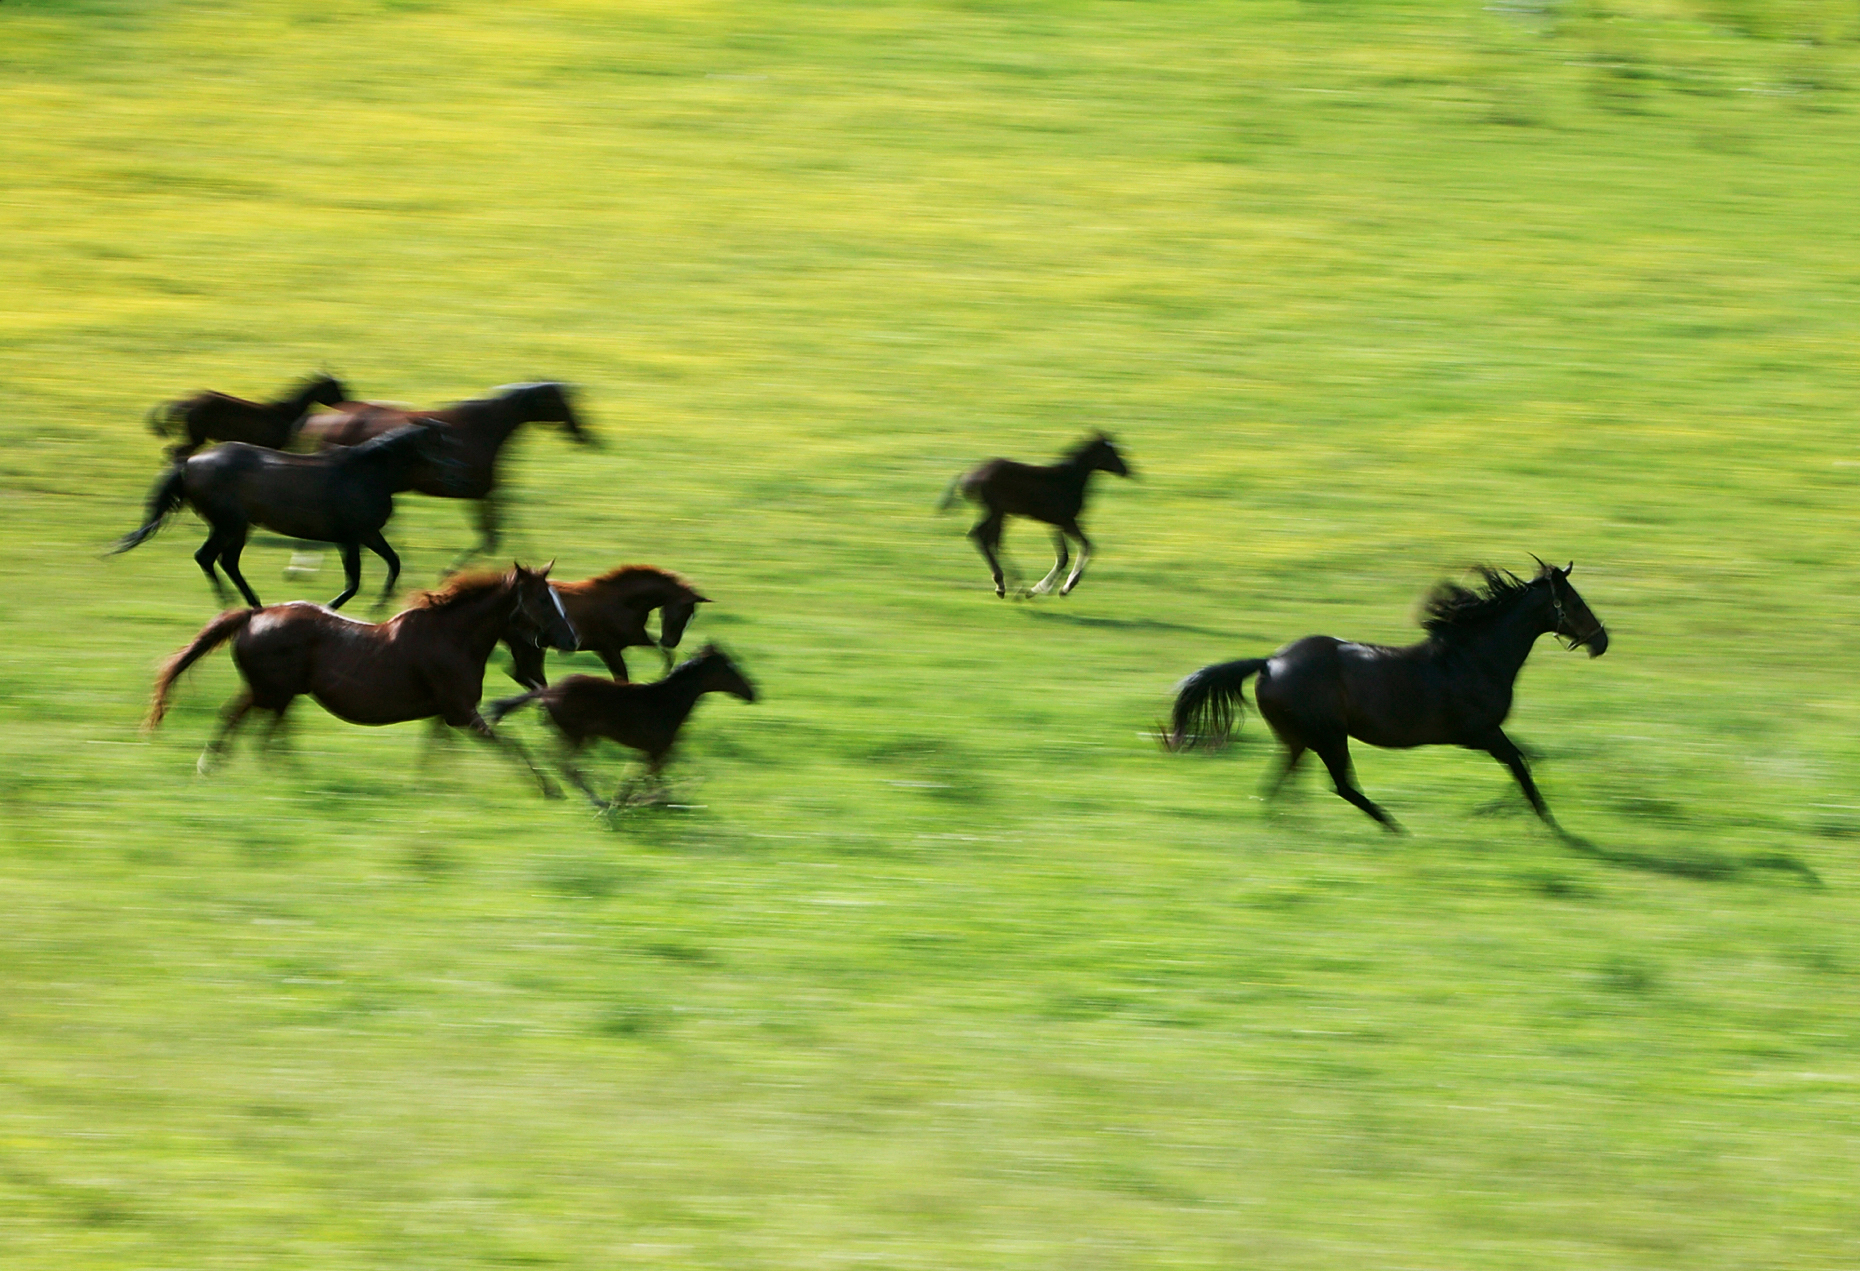 Mares and foals running in springtime at the Mau Meadows, Pennsylvania thoroughbred horse farm.